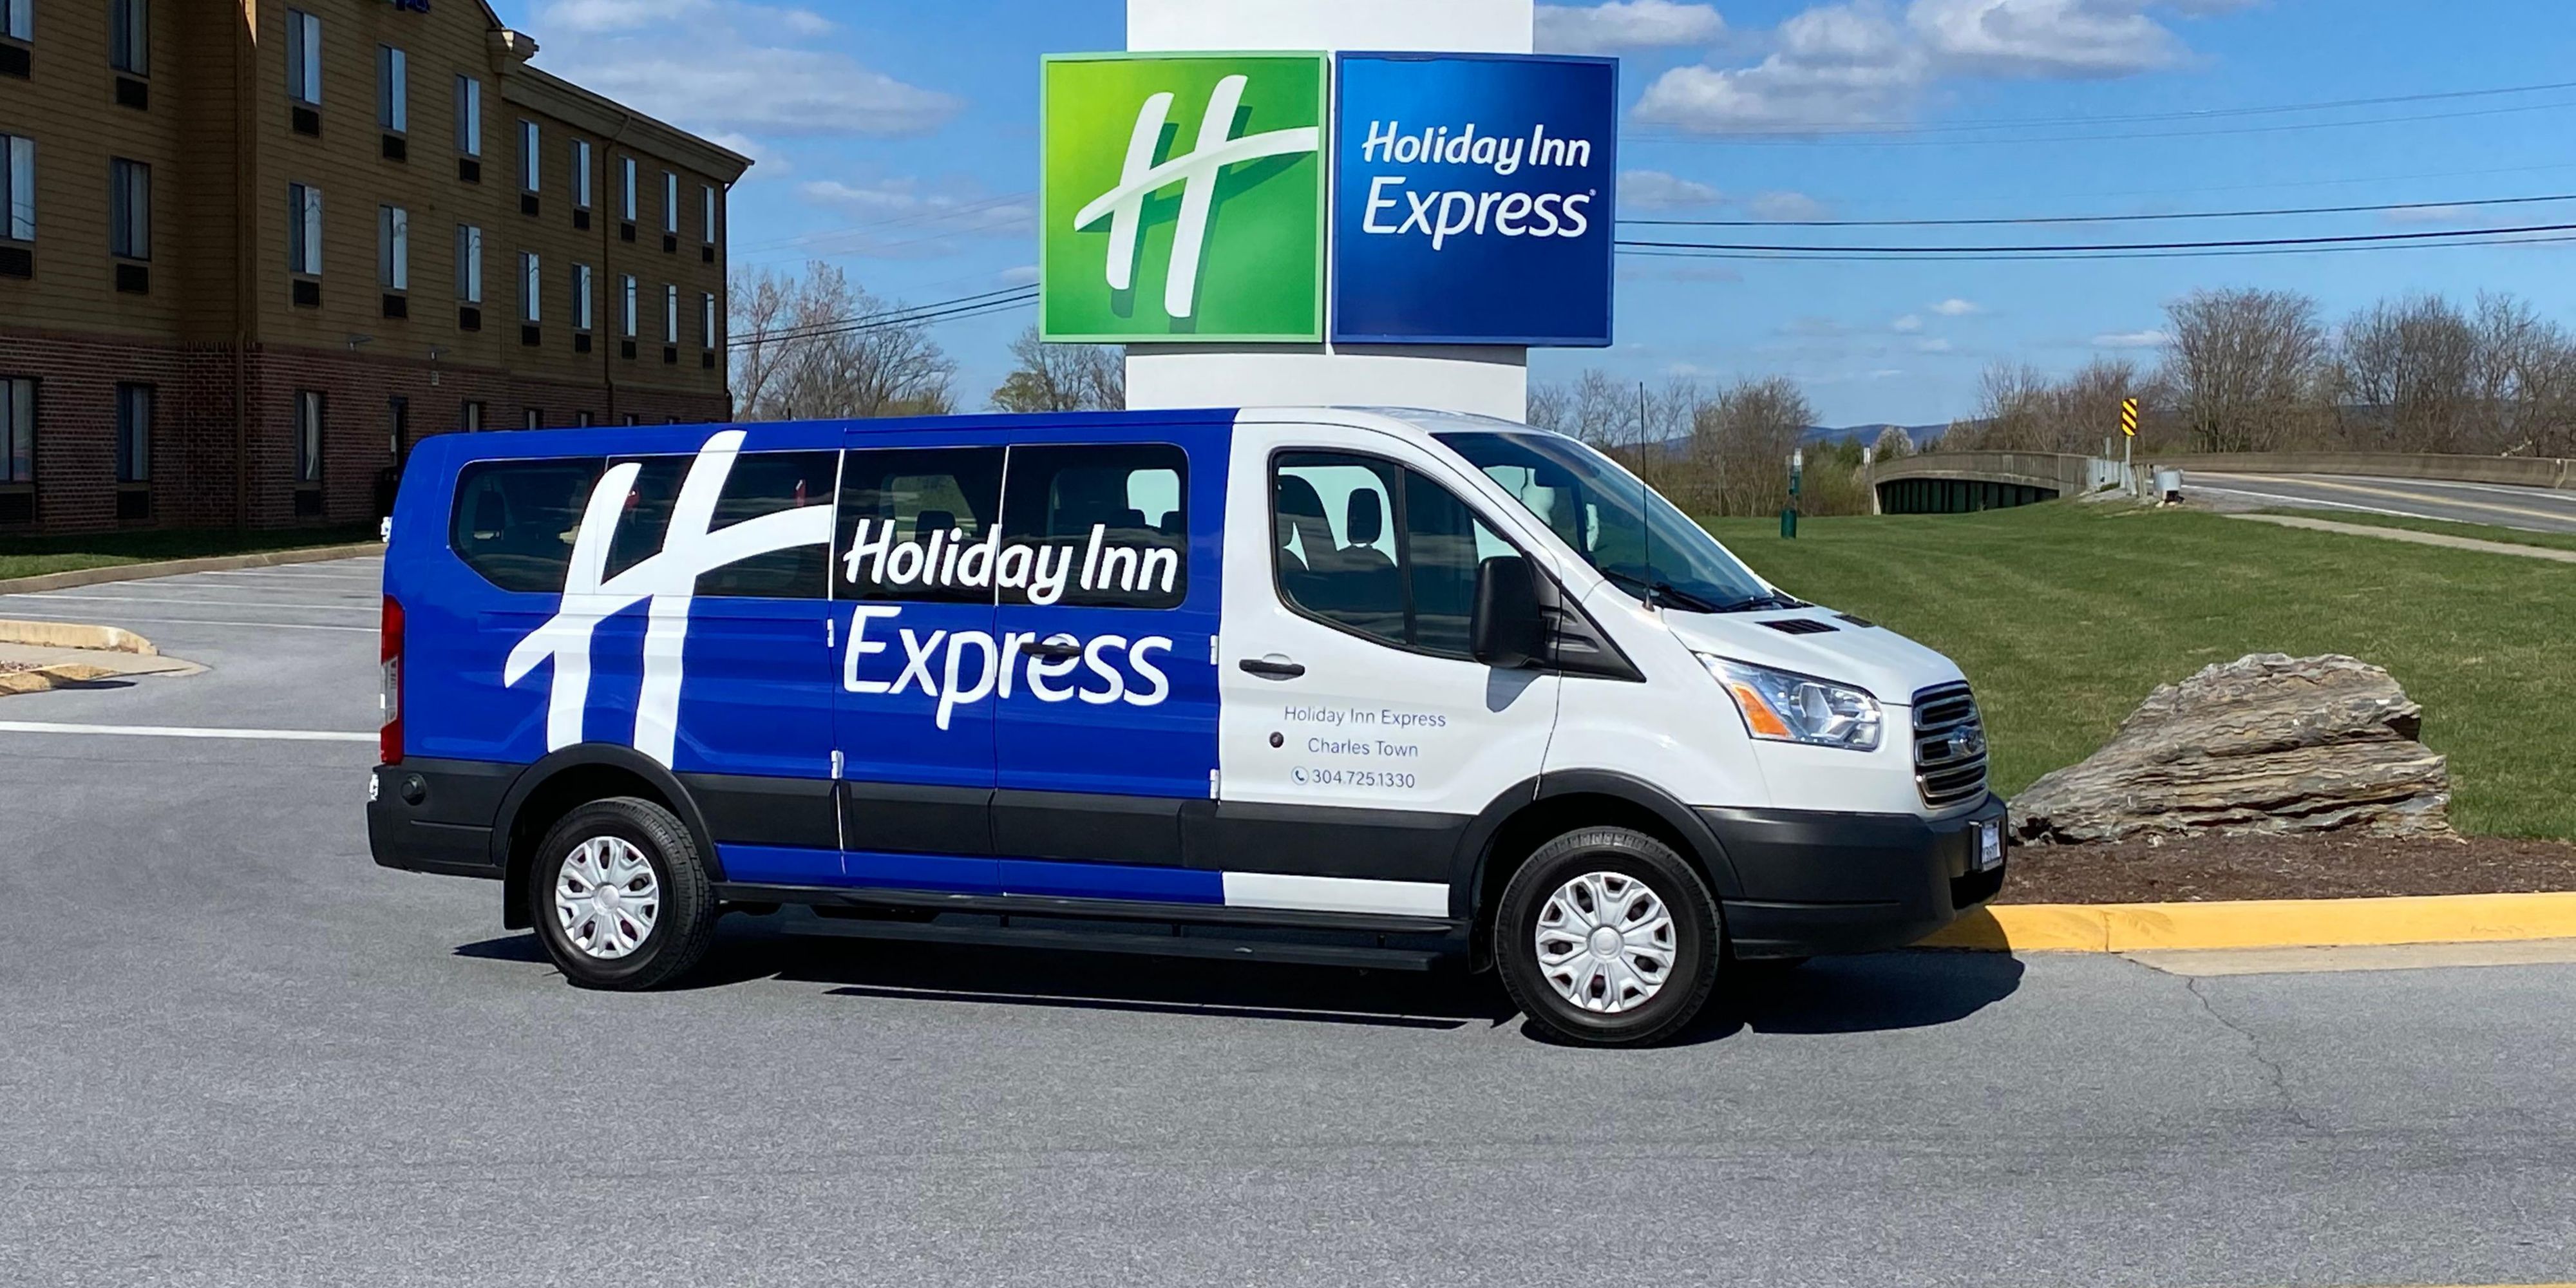 We offer a complimentary shuttle service that travels to any location within a 2 miles radius. This includes, but not limited to, The Hollywood Casino Races & Slots, Historic Downtown Charles Town, and a variety of local restaurants and shops. 